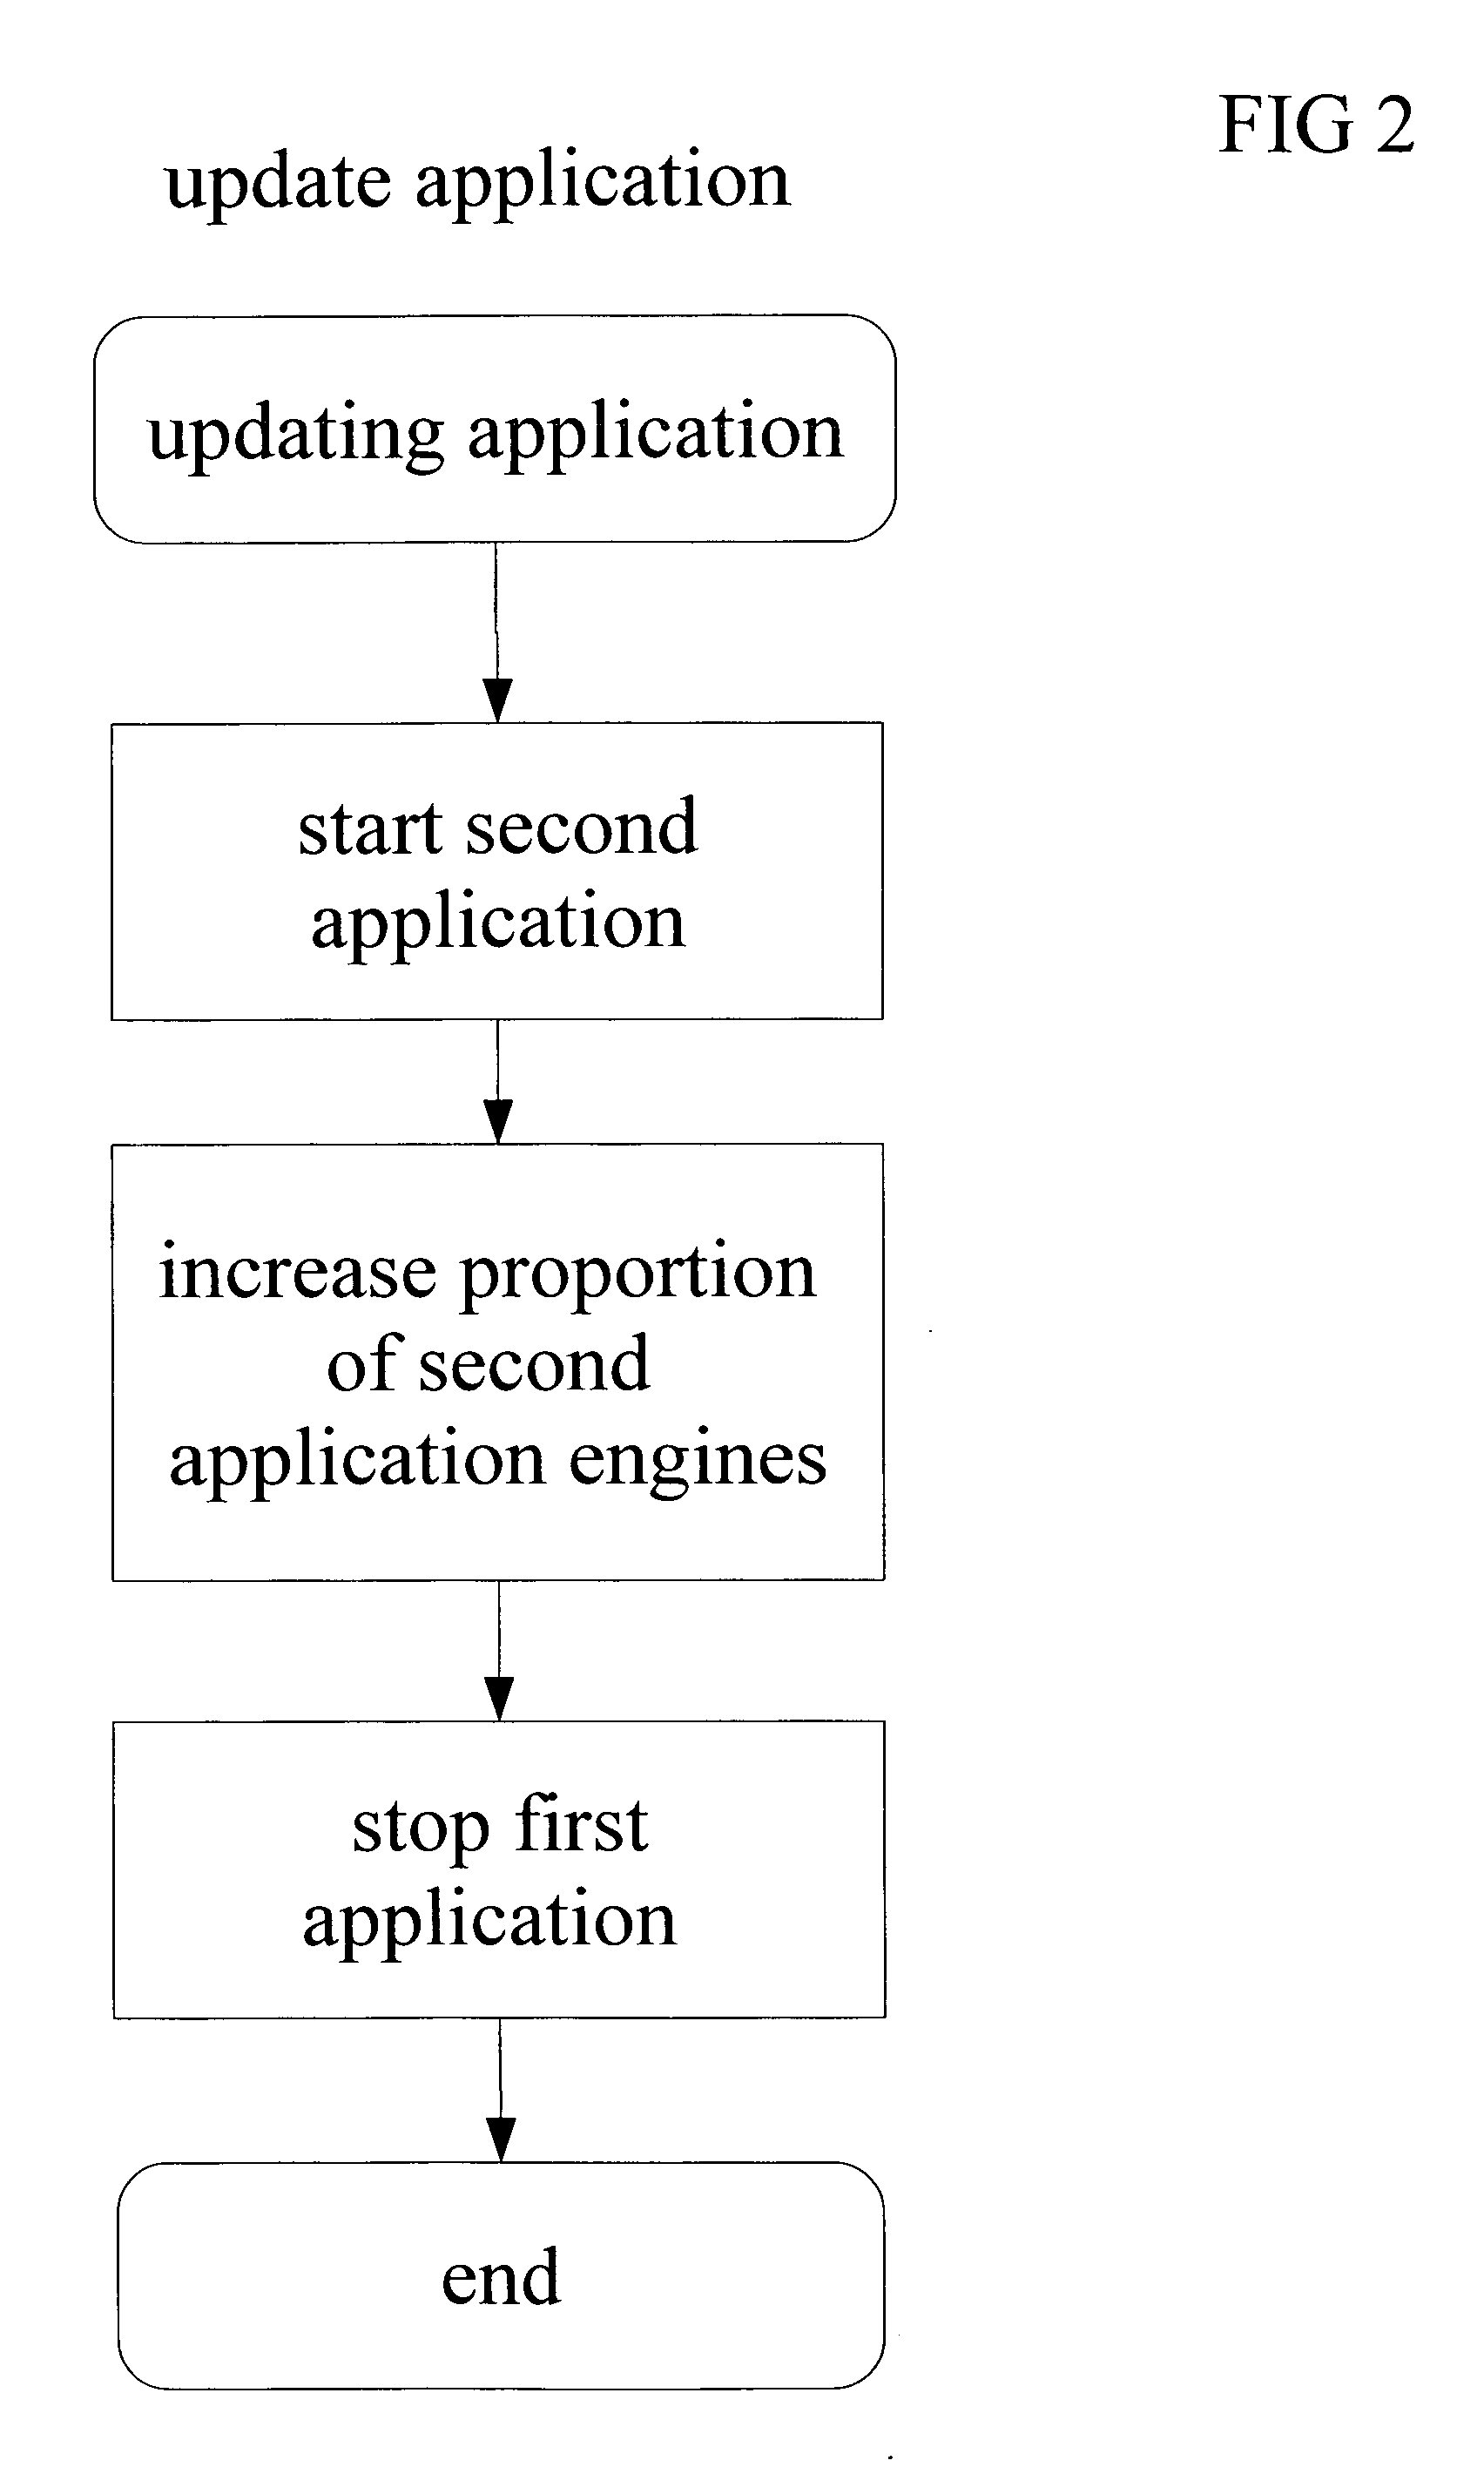 Update technique for speech recognition applications with uninterrupted (24X7) operation